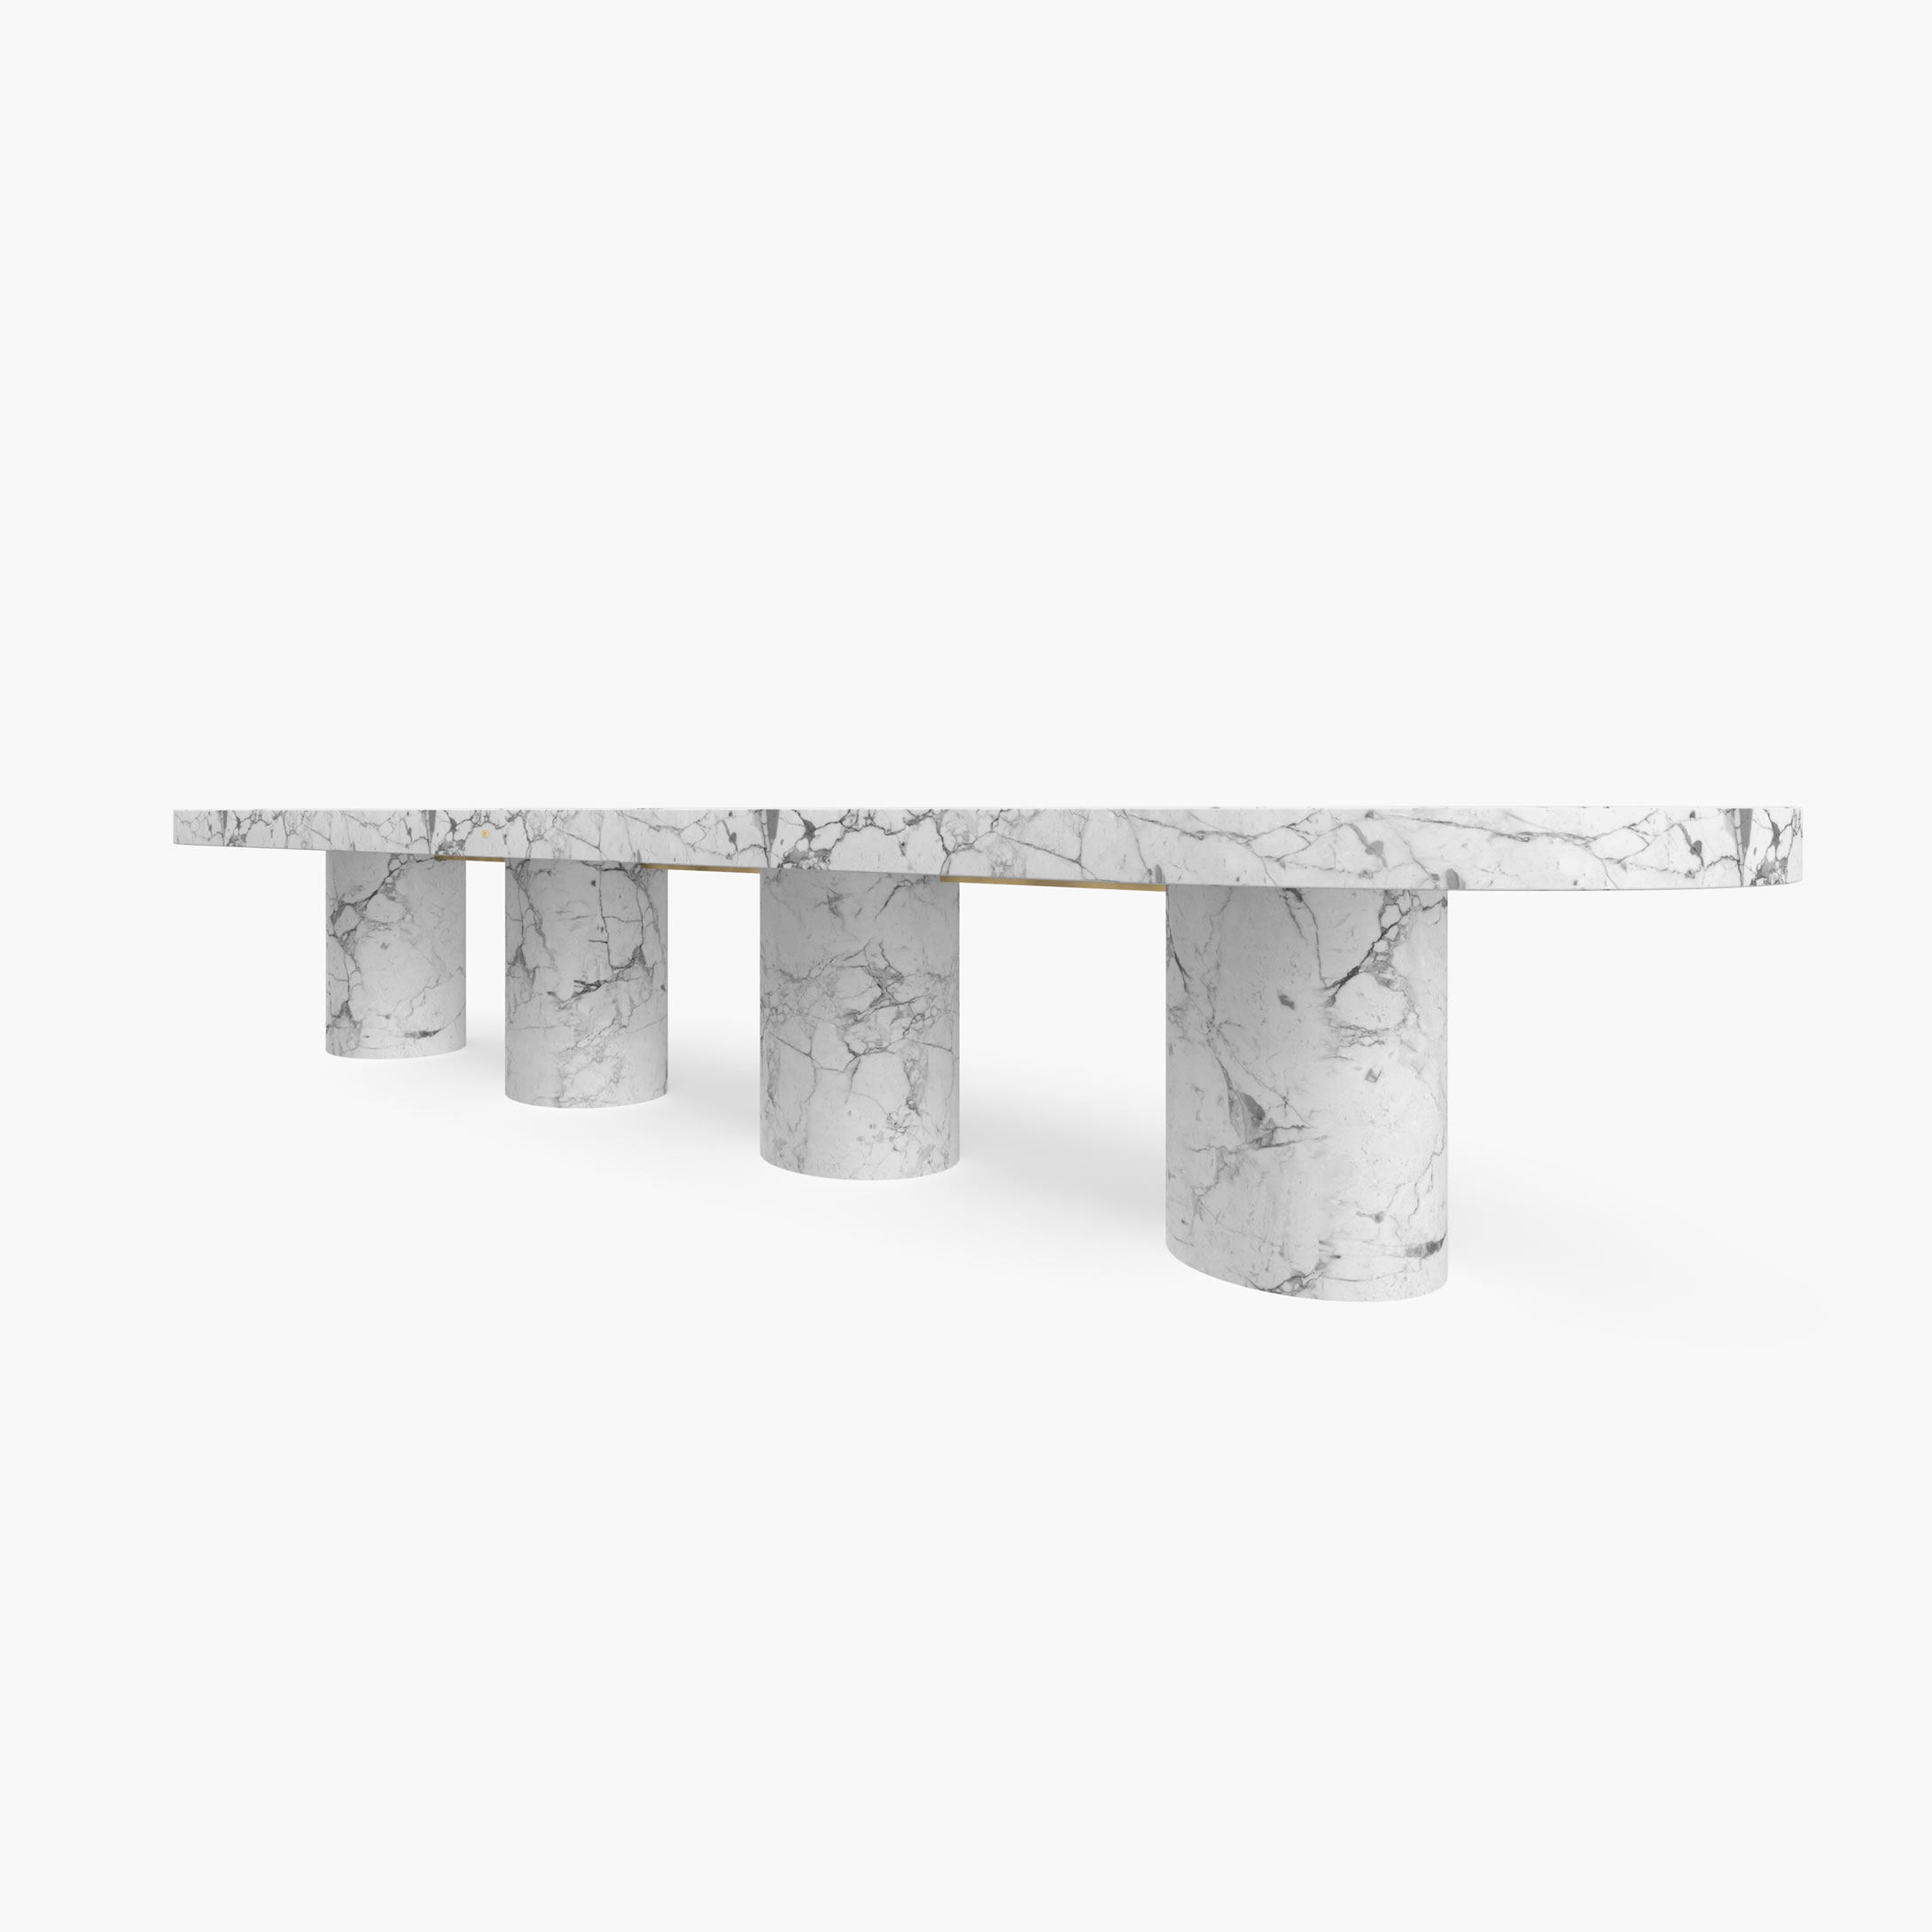 Dining Table very large Cylinder legs White Arabescato Marble art Dining Room art works Dining Tables FS 180 FELIX SCHWAKE